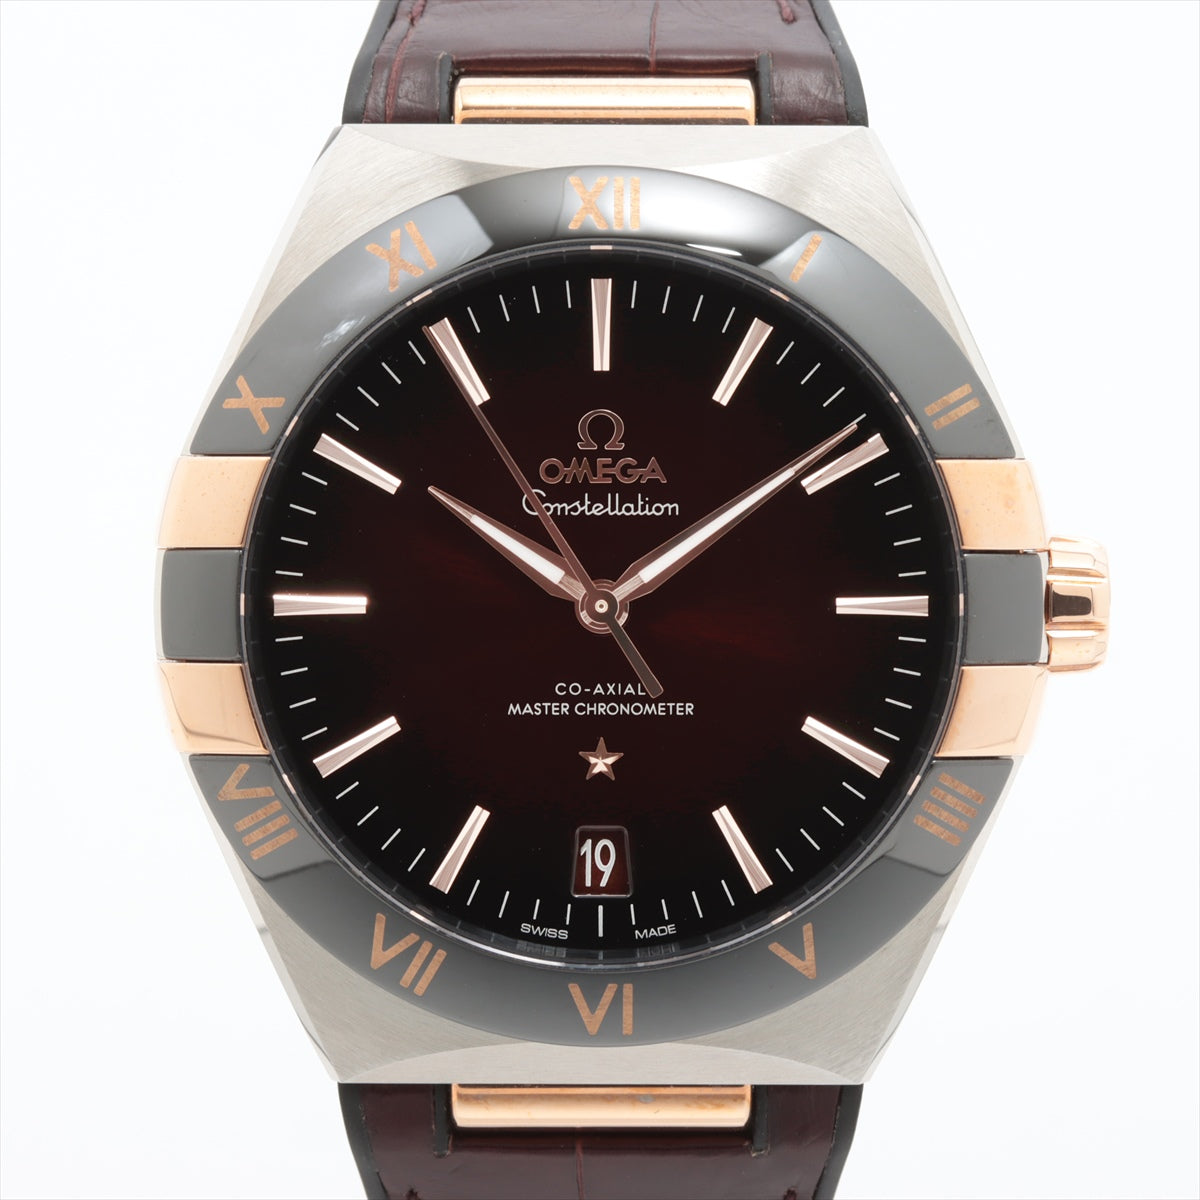 Omega Constellation Coaxial Master Chronometer 131.23.41.21.11.001 SS Leather× Lavier AT Birkingundy Character Disc